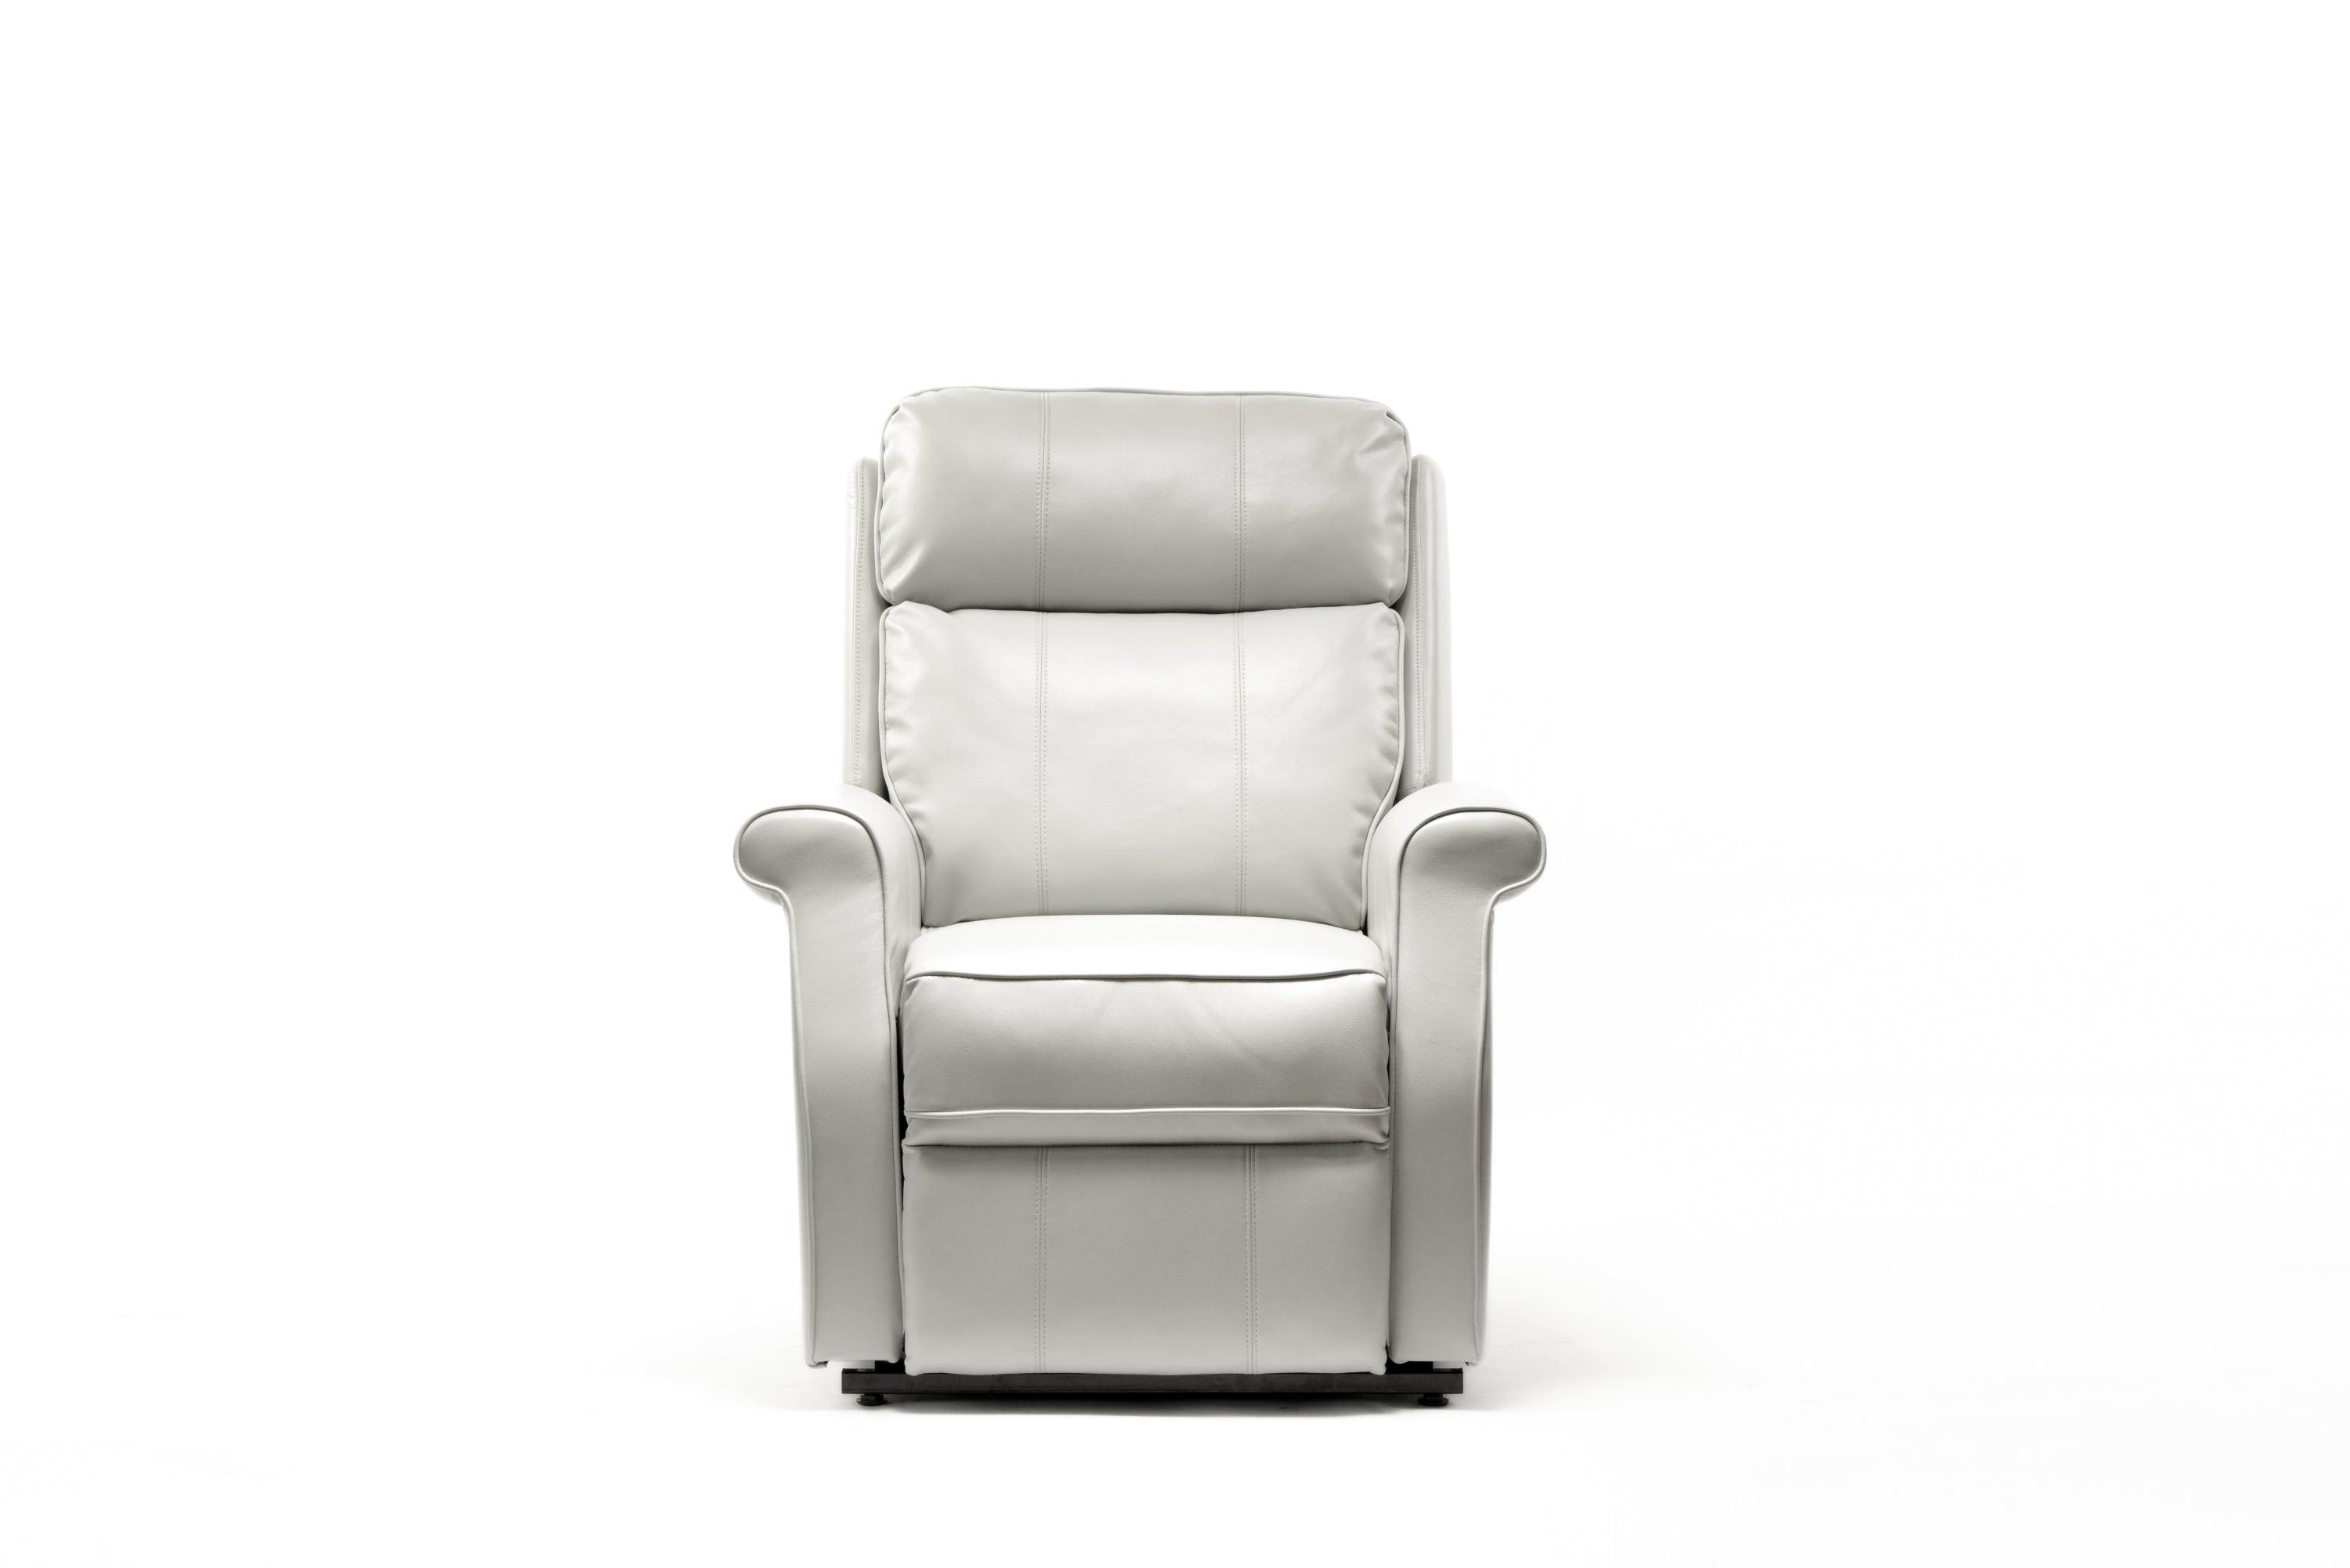 Landis Lift Chair Recliner, front view